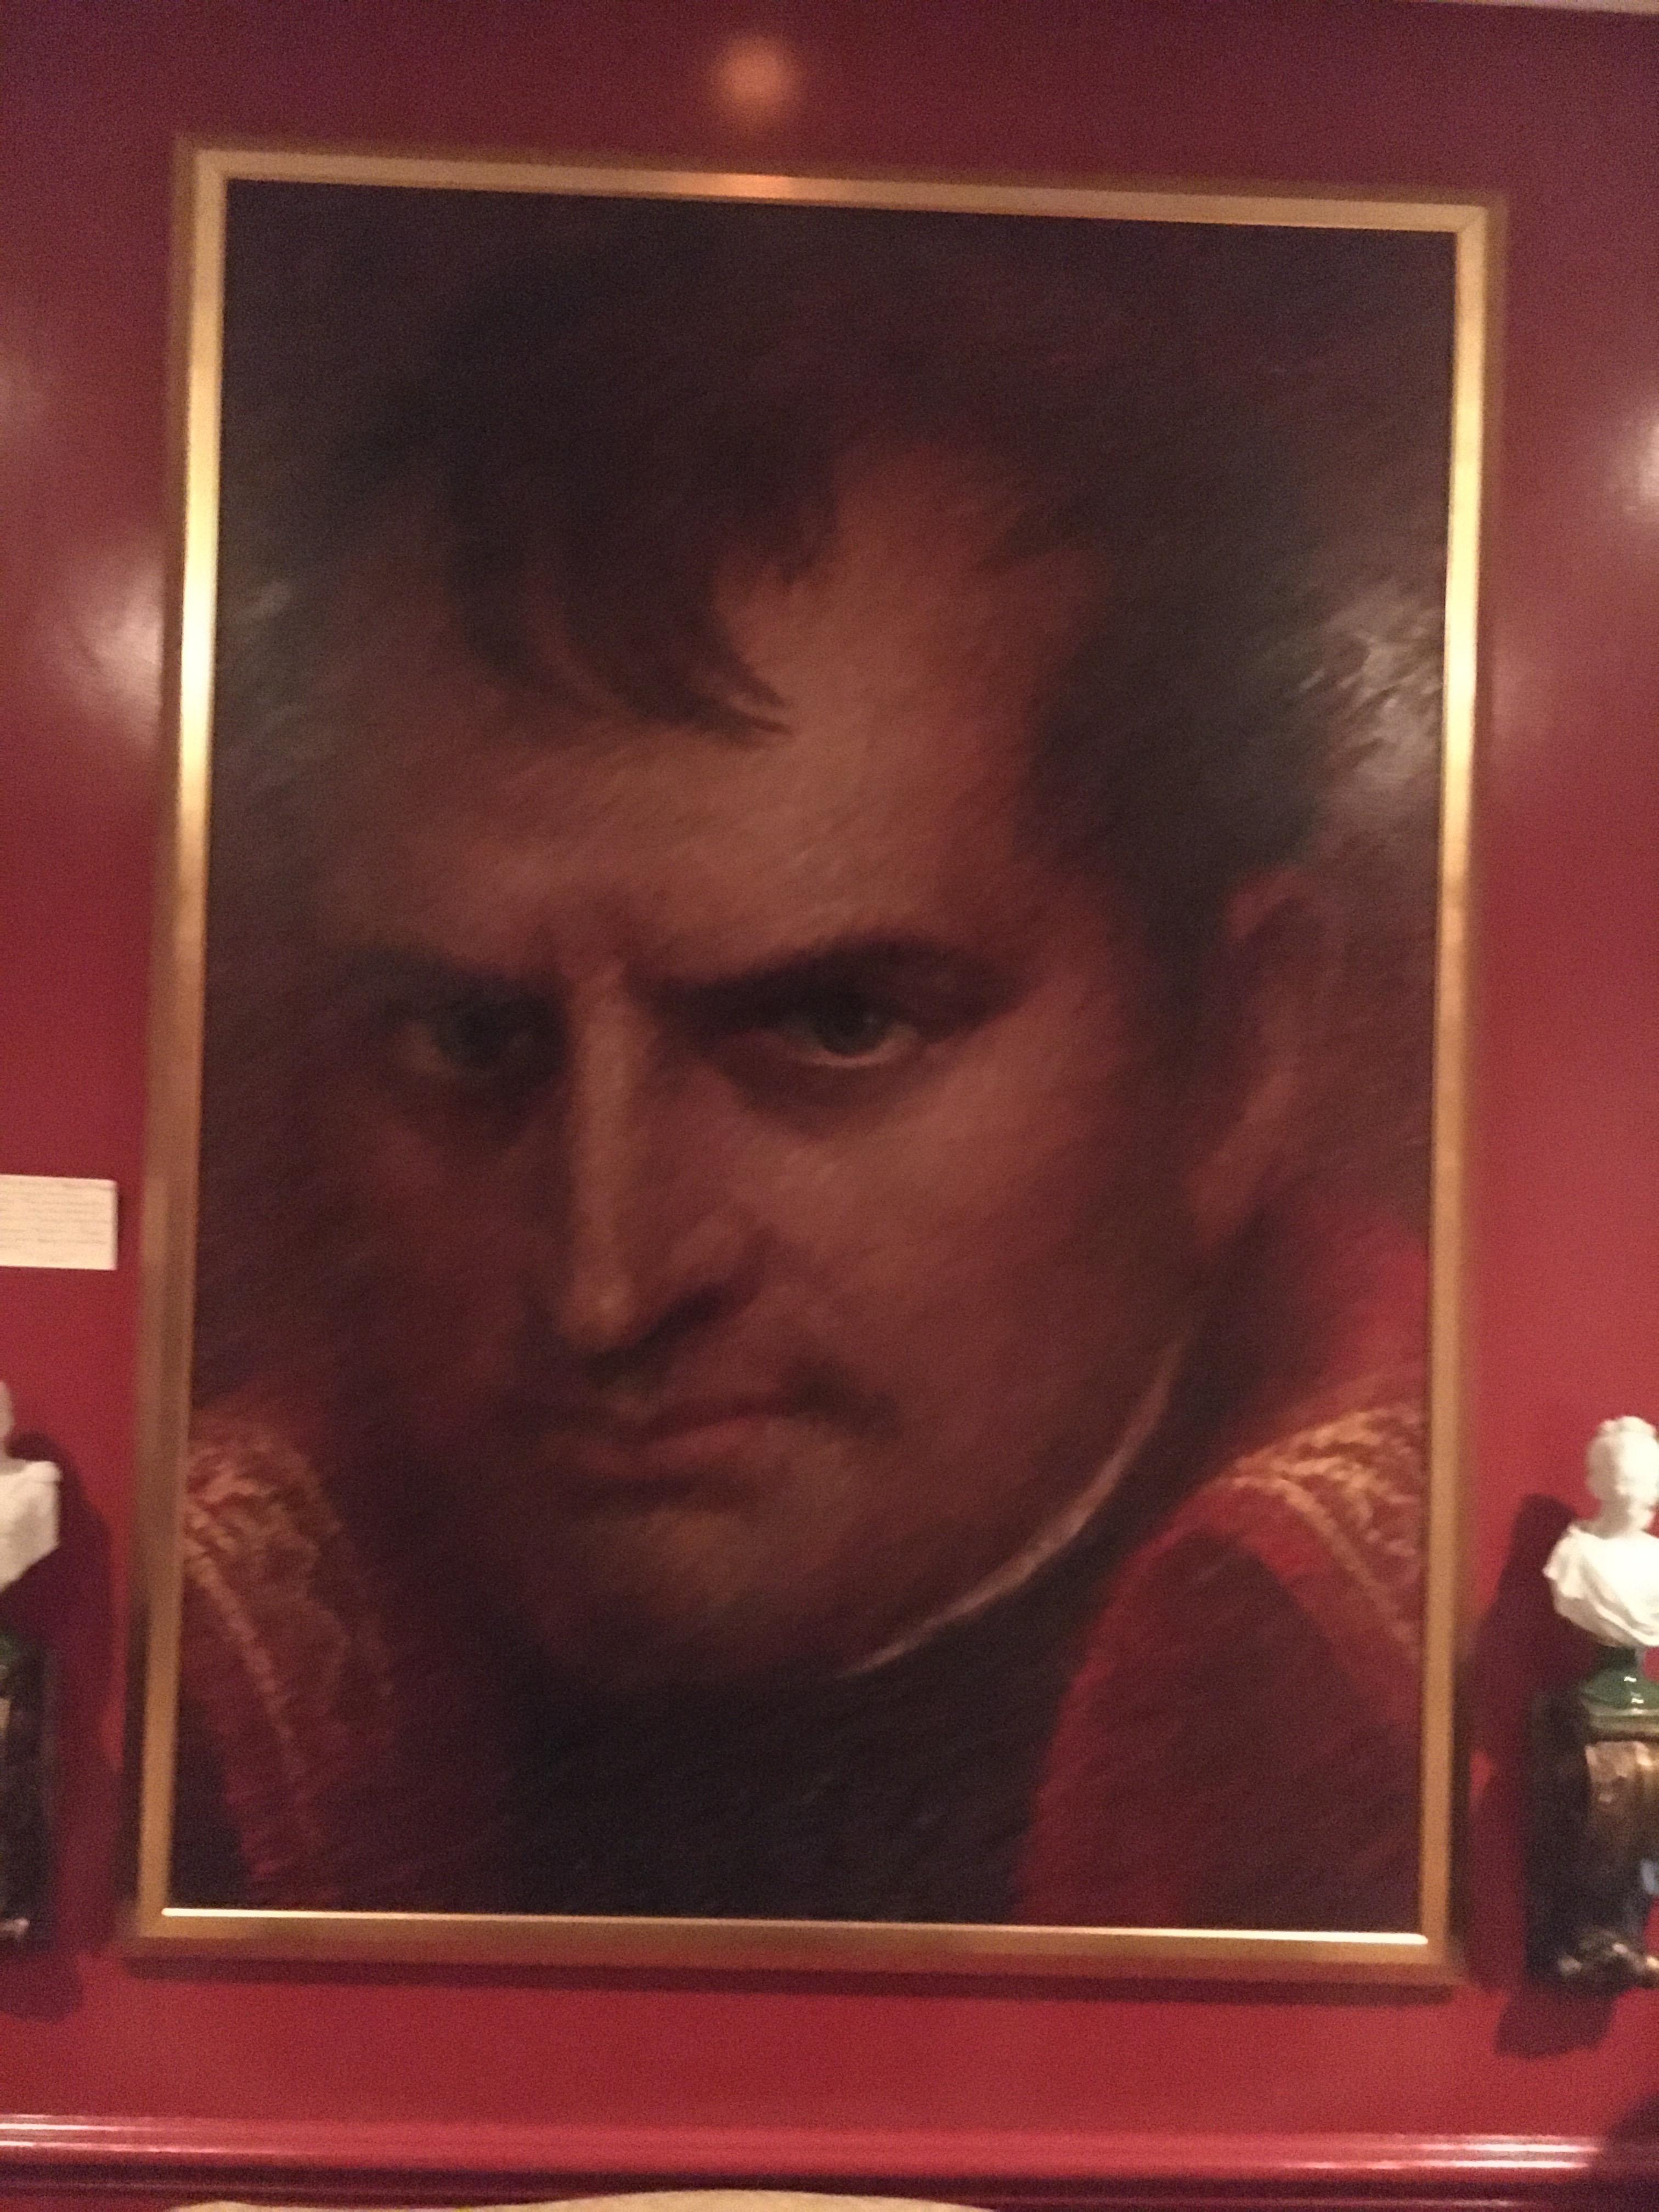 Monumental oil on canvas portrait of Napoleon in giltwood frame artist Dan Piel, Done in 1976, commissioned privately. Other noted portraits include Lyndon B Johnson which hangs in the Johnson Museum in Austin TX.